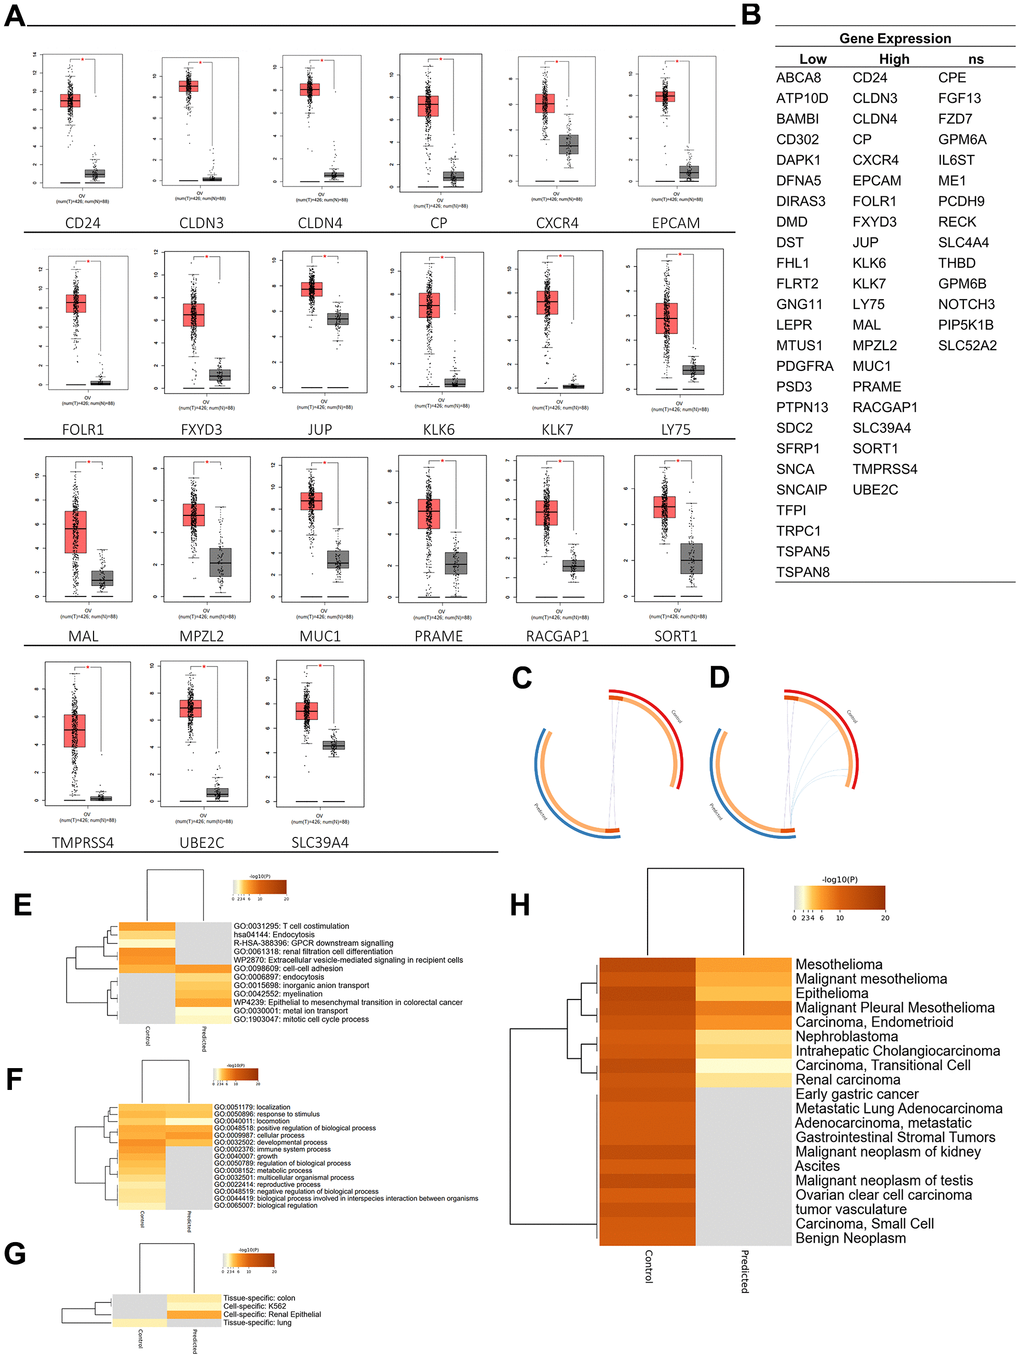 Oncogenicity analysis. (A) Twenty-one genes were significantly expressed in ovarian cancer among plasma membrane-related genes. (B) Plasma membrane-related genes expressions in ovarian cancer. (C) Overlap between gene lists: high expression gene list (Predicted) and Control gene list, (D) including the shared term level, where blue curves connect genes that share an enriched ontology term. Gene lists are represented by the inner circle, with hits arranged along the arc. Genes that appear on multiple lists are depicted in dark orange, while genes that only appear on one list are displayed in light orange. (E) Heatmap of enriched terms across input gene lists, colored by p-values. (F) Heatmap of biological processes across input gene lists, colored by p-values. (G) Pattern genes related to predicted and control genes. (H) DisGeNET is a discovery platform containing one of the largest publicly available collections of genes and variants associated with human diseases. The heatmap is colored by p-values. Dark orange indicates a greater probability that bioactivity will occur.